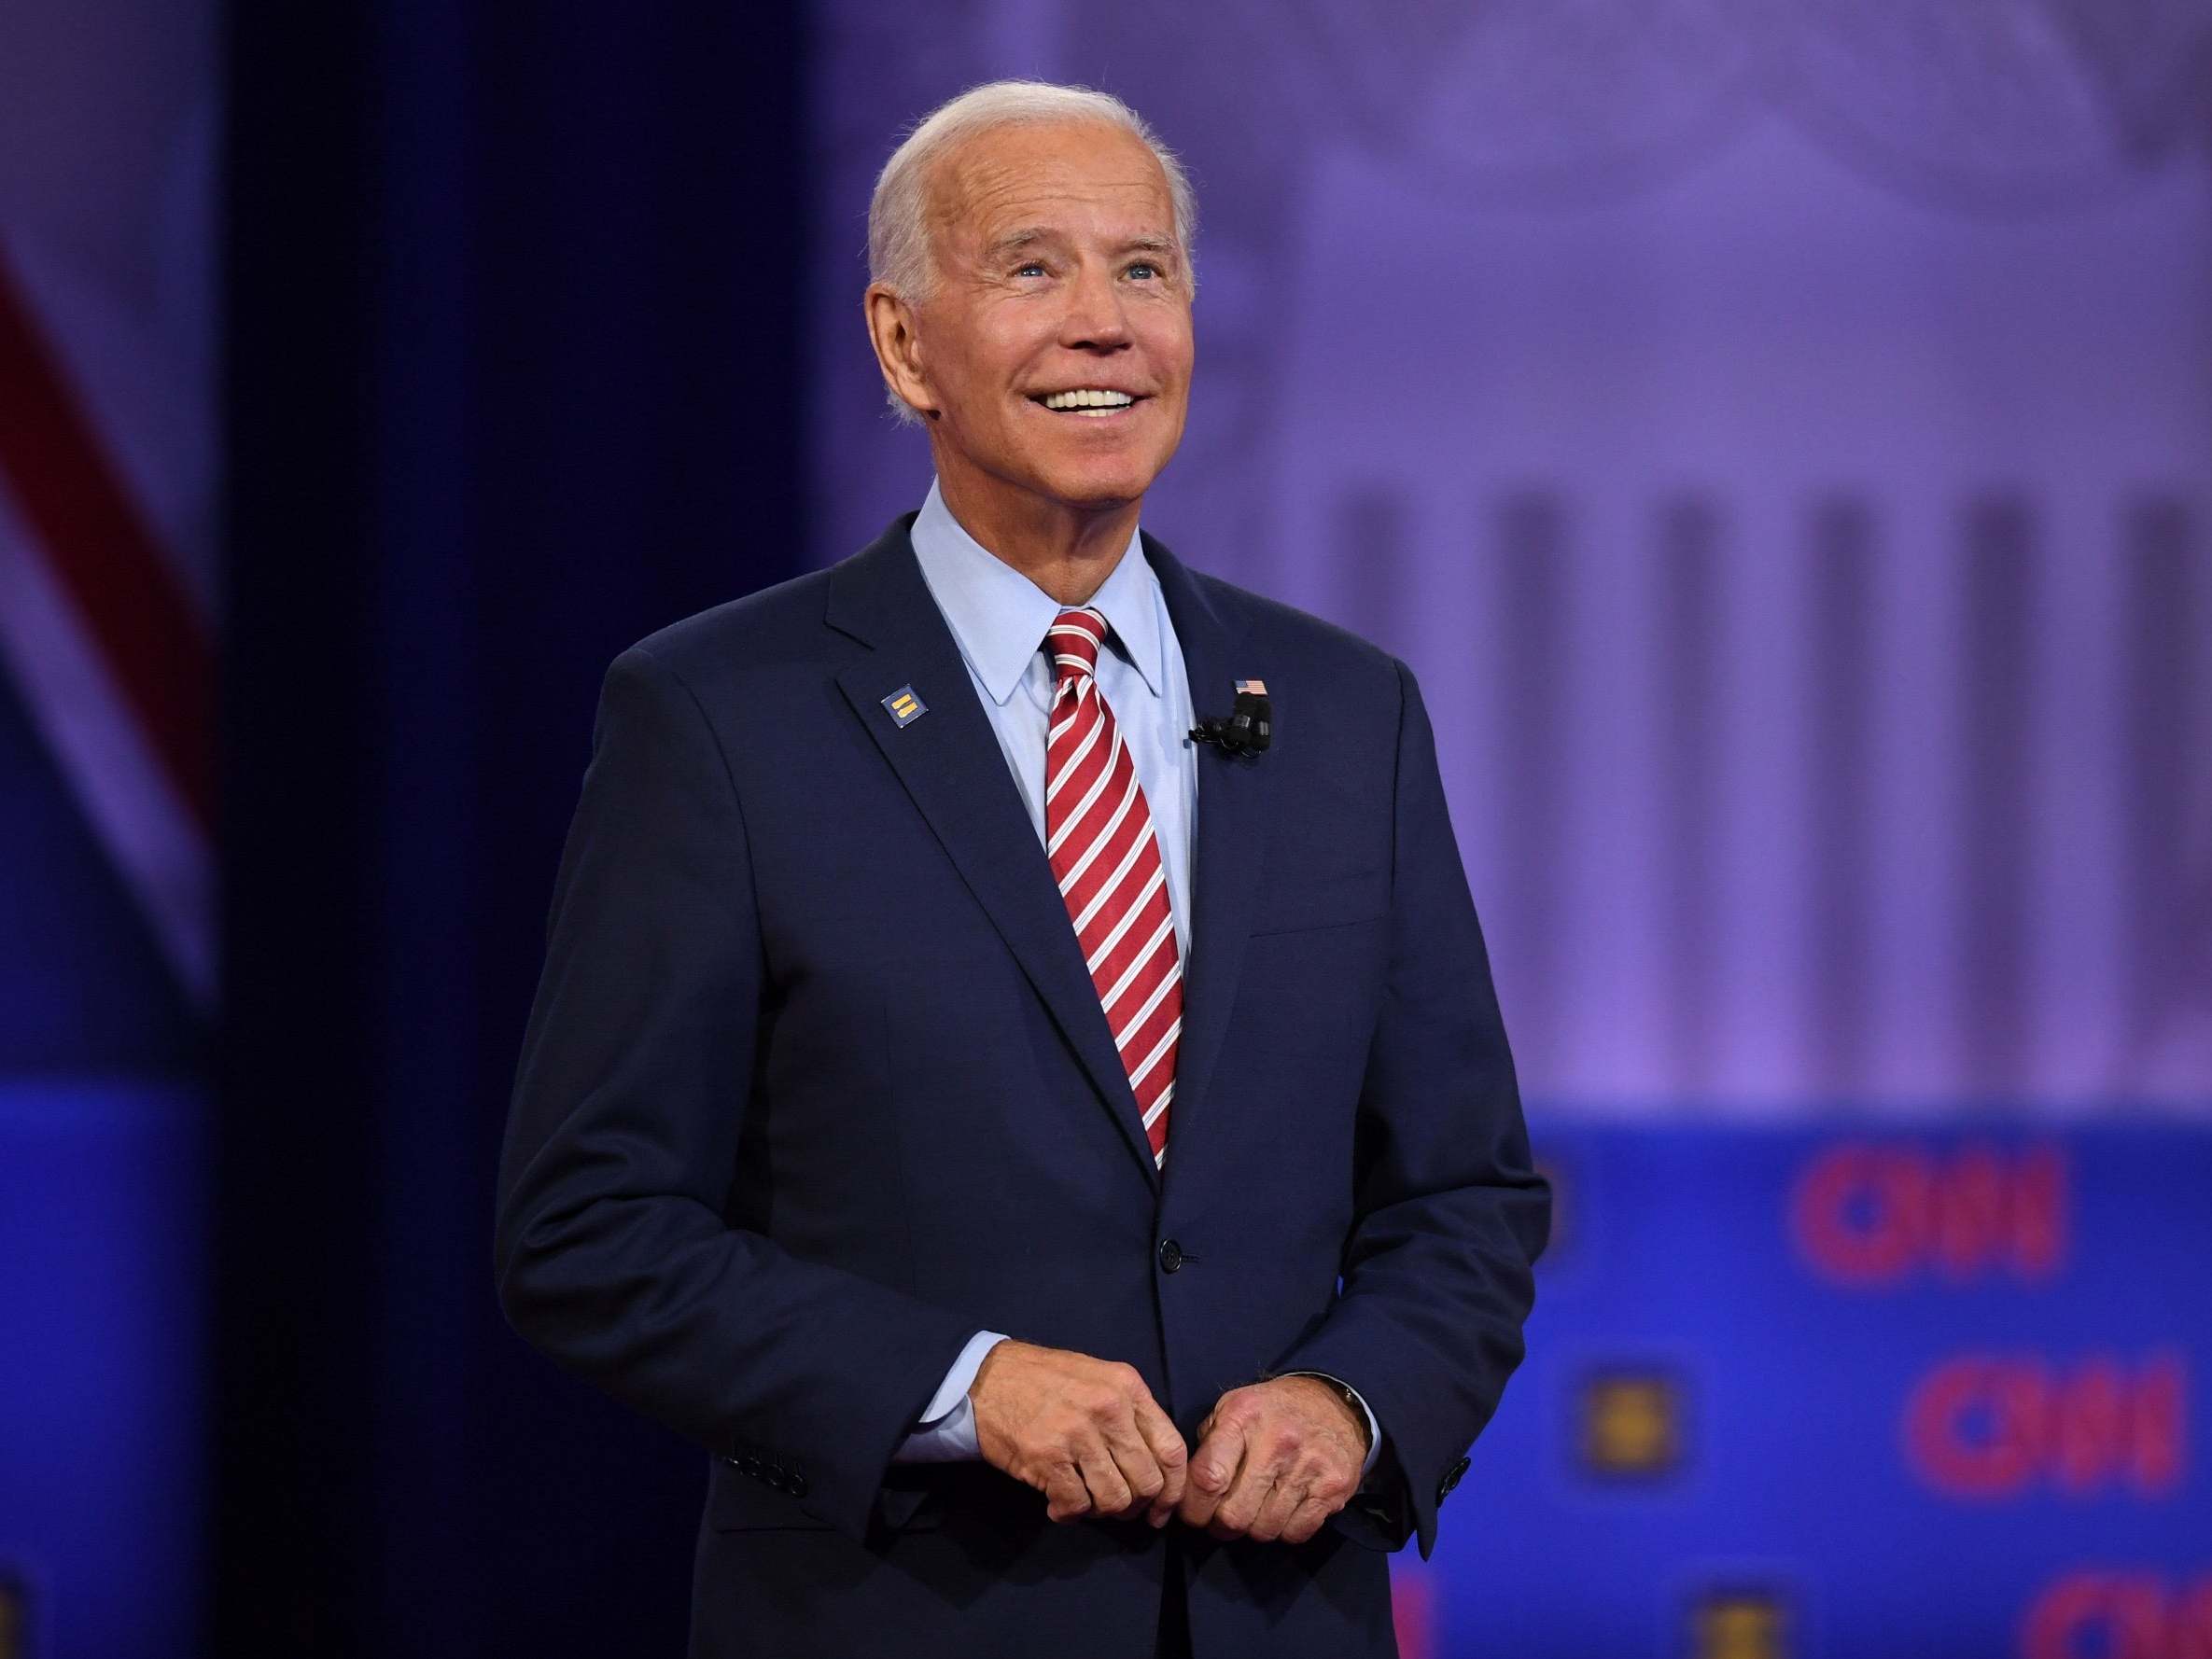 After Bernie Sanders formally ended his campaign last week, it's all but guaranteed that Biden will face off against Trump in November